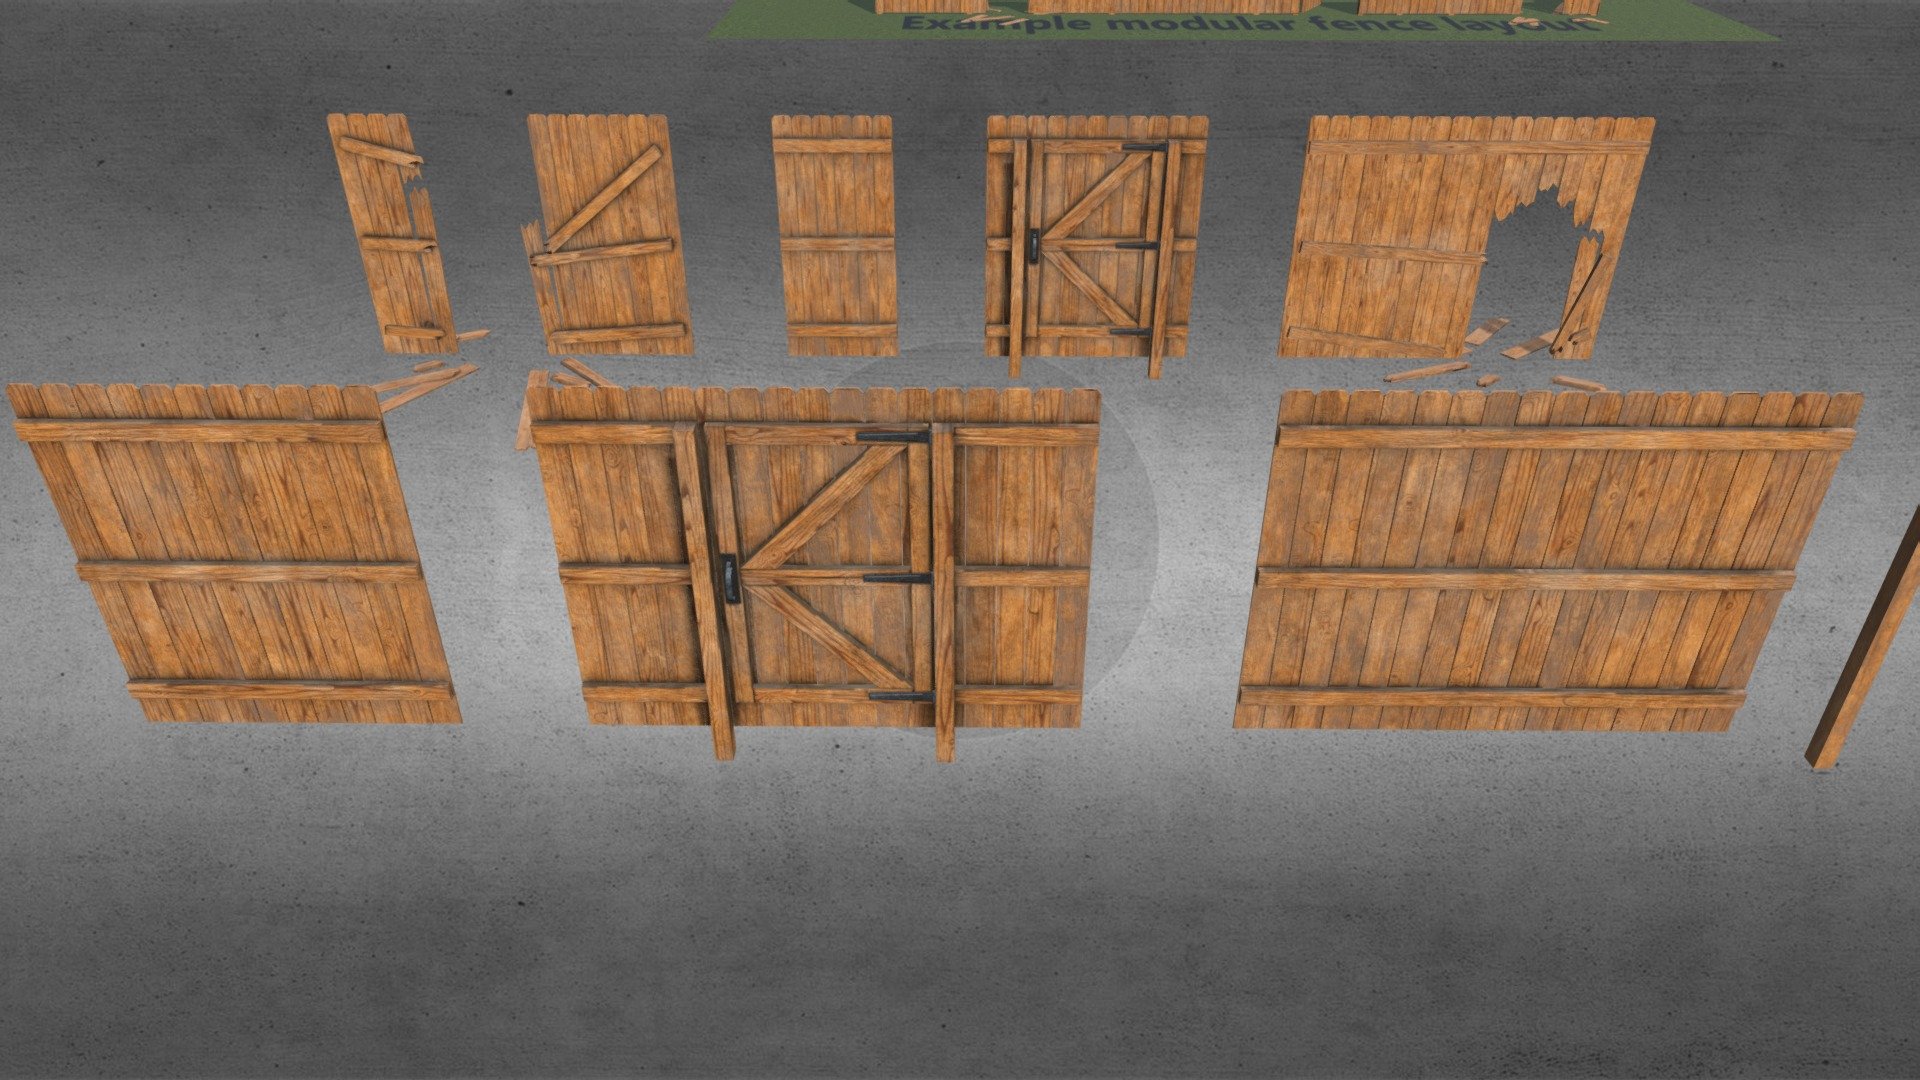 This modular privacy fence pack includes doors that can open and close, and two damaged fence sections. Damaged fence sections are designed for game projects allowing players or NPCs to get through the fence if required. Low-poly, game ready with each fence section between 100 - 1100 polygons. 

This modular fence pack also includes 4 different texture options including both wood and stylized wood texture maps.

All fence sections have PBR materials (Diffuse, Emissive, Normal, and OcclusionRoughMet maps).
**Note - the texture naming convention is: ** (mesh name)(mesh name + map)(texture type)

Feel free to use for any project. All feedback is welcome and appreciated. Check out my other models to populate your project. Thanks for checking out my stuff and the likes.




Check out all my other models including this most recent model.
 - Privacy Fence Pack (with damaged sections) - Download Free 3D model by TampaJoey 3d model